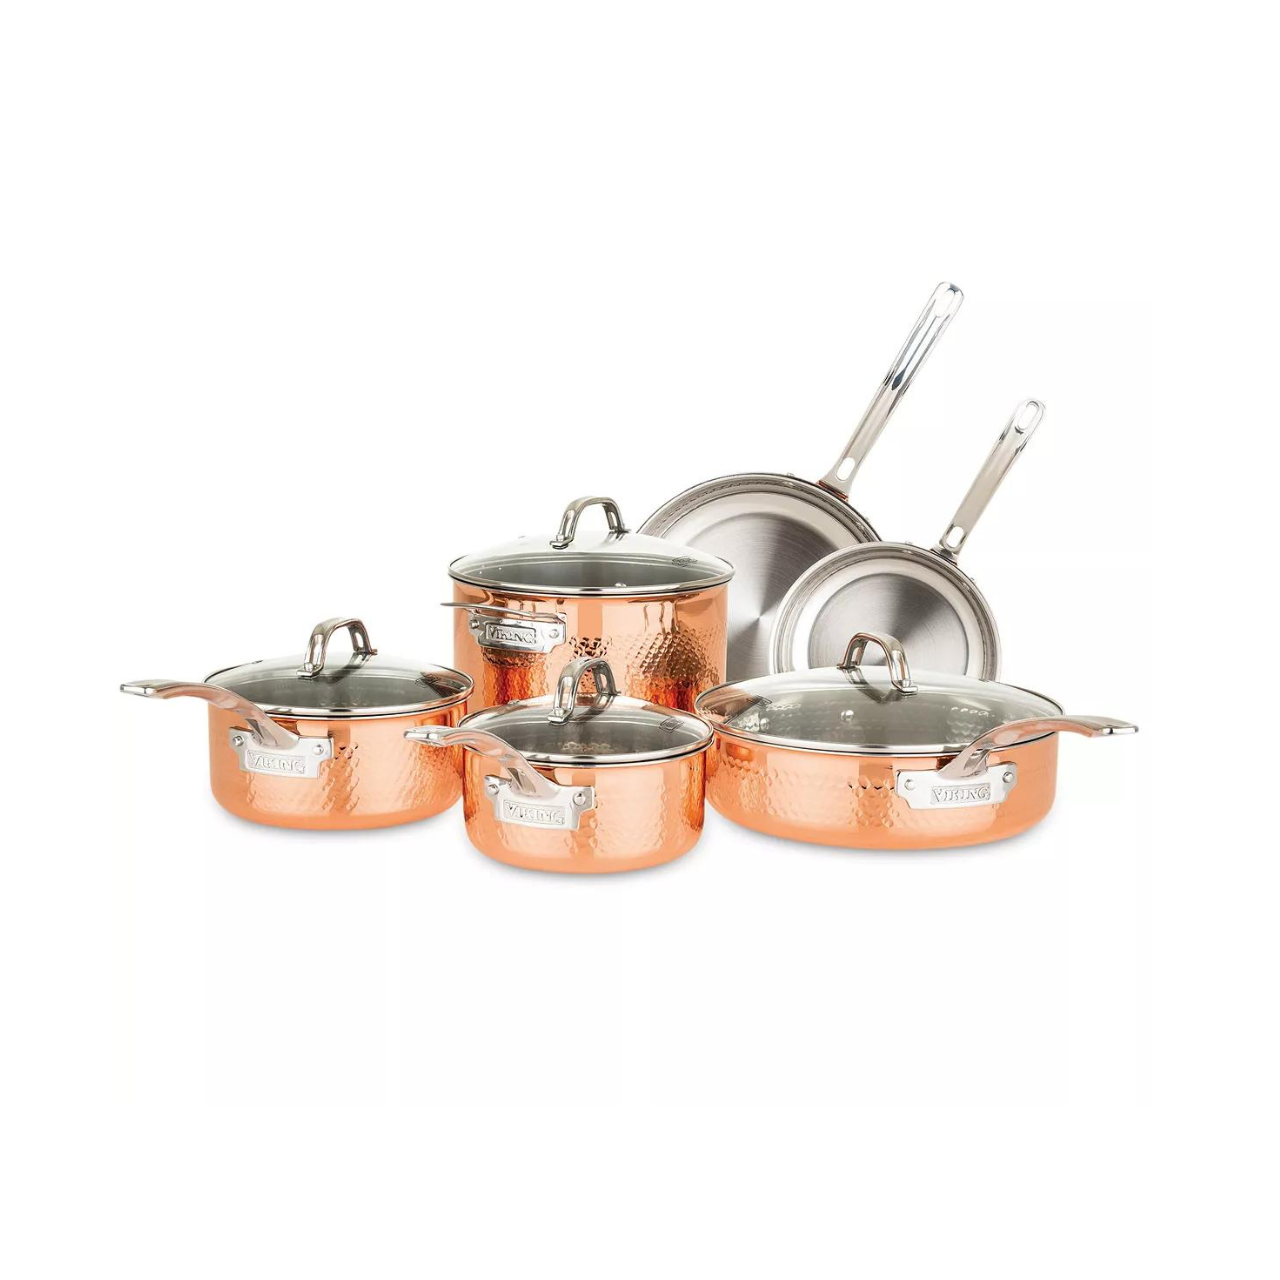 10-Piece Viking Culinary 3-Ply Hammered Copper Clad Cookware Set